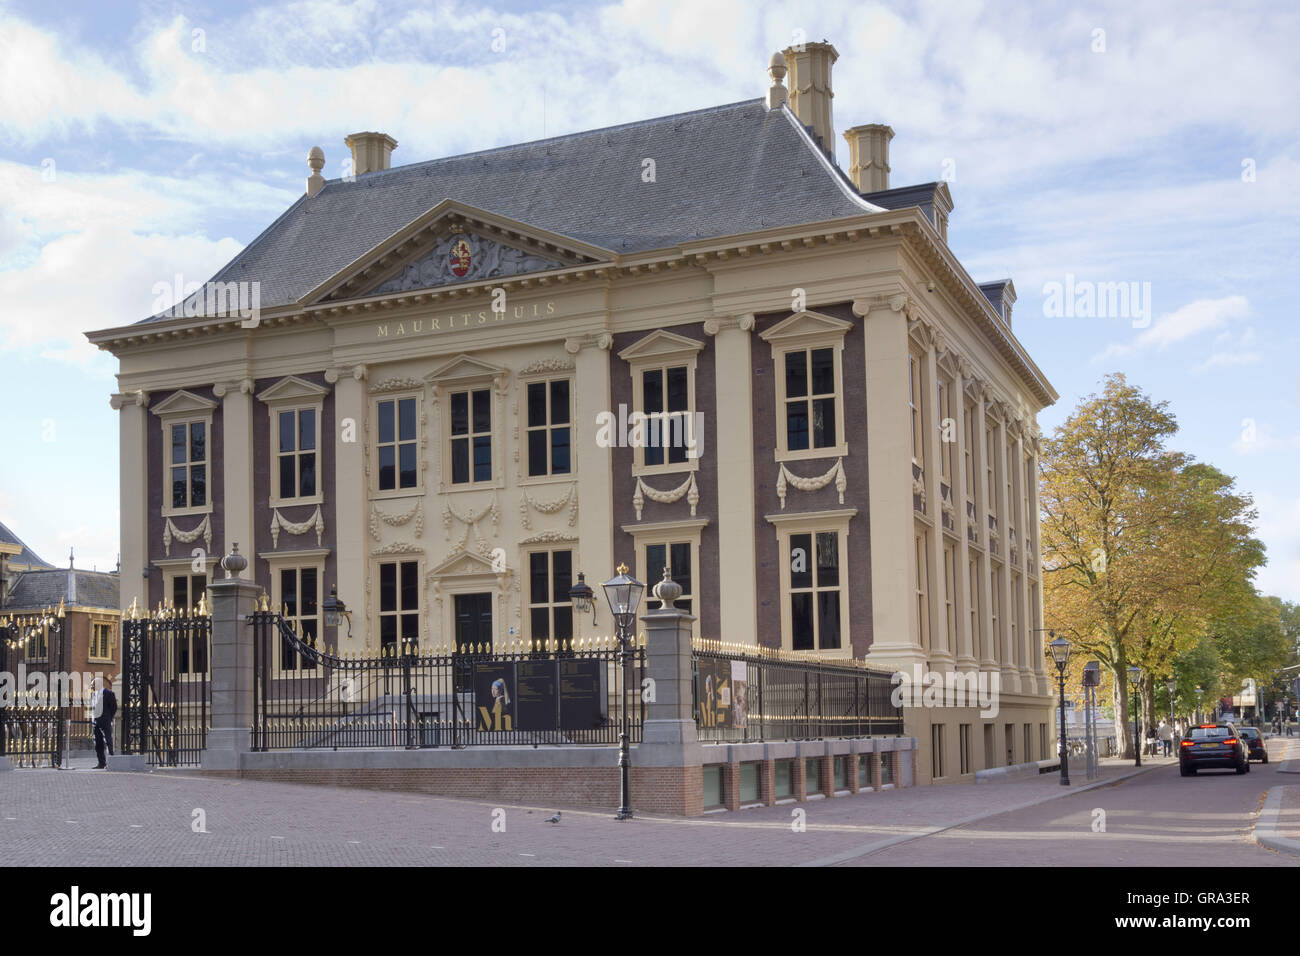 Mauritshuis Museum, The Hague, The Netherlands, Europe Stock Photo